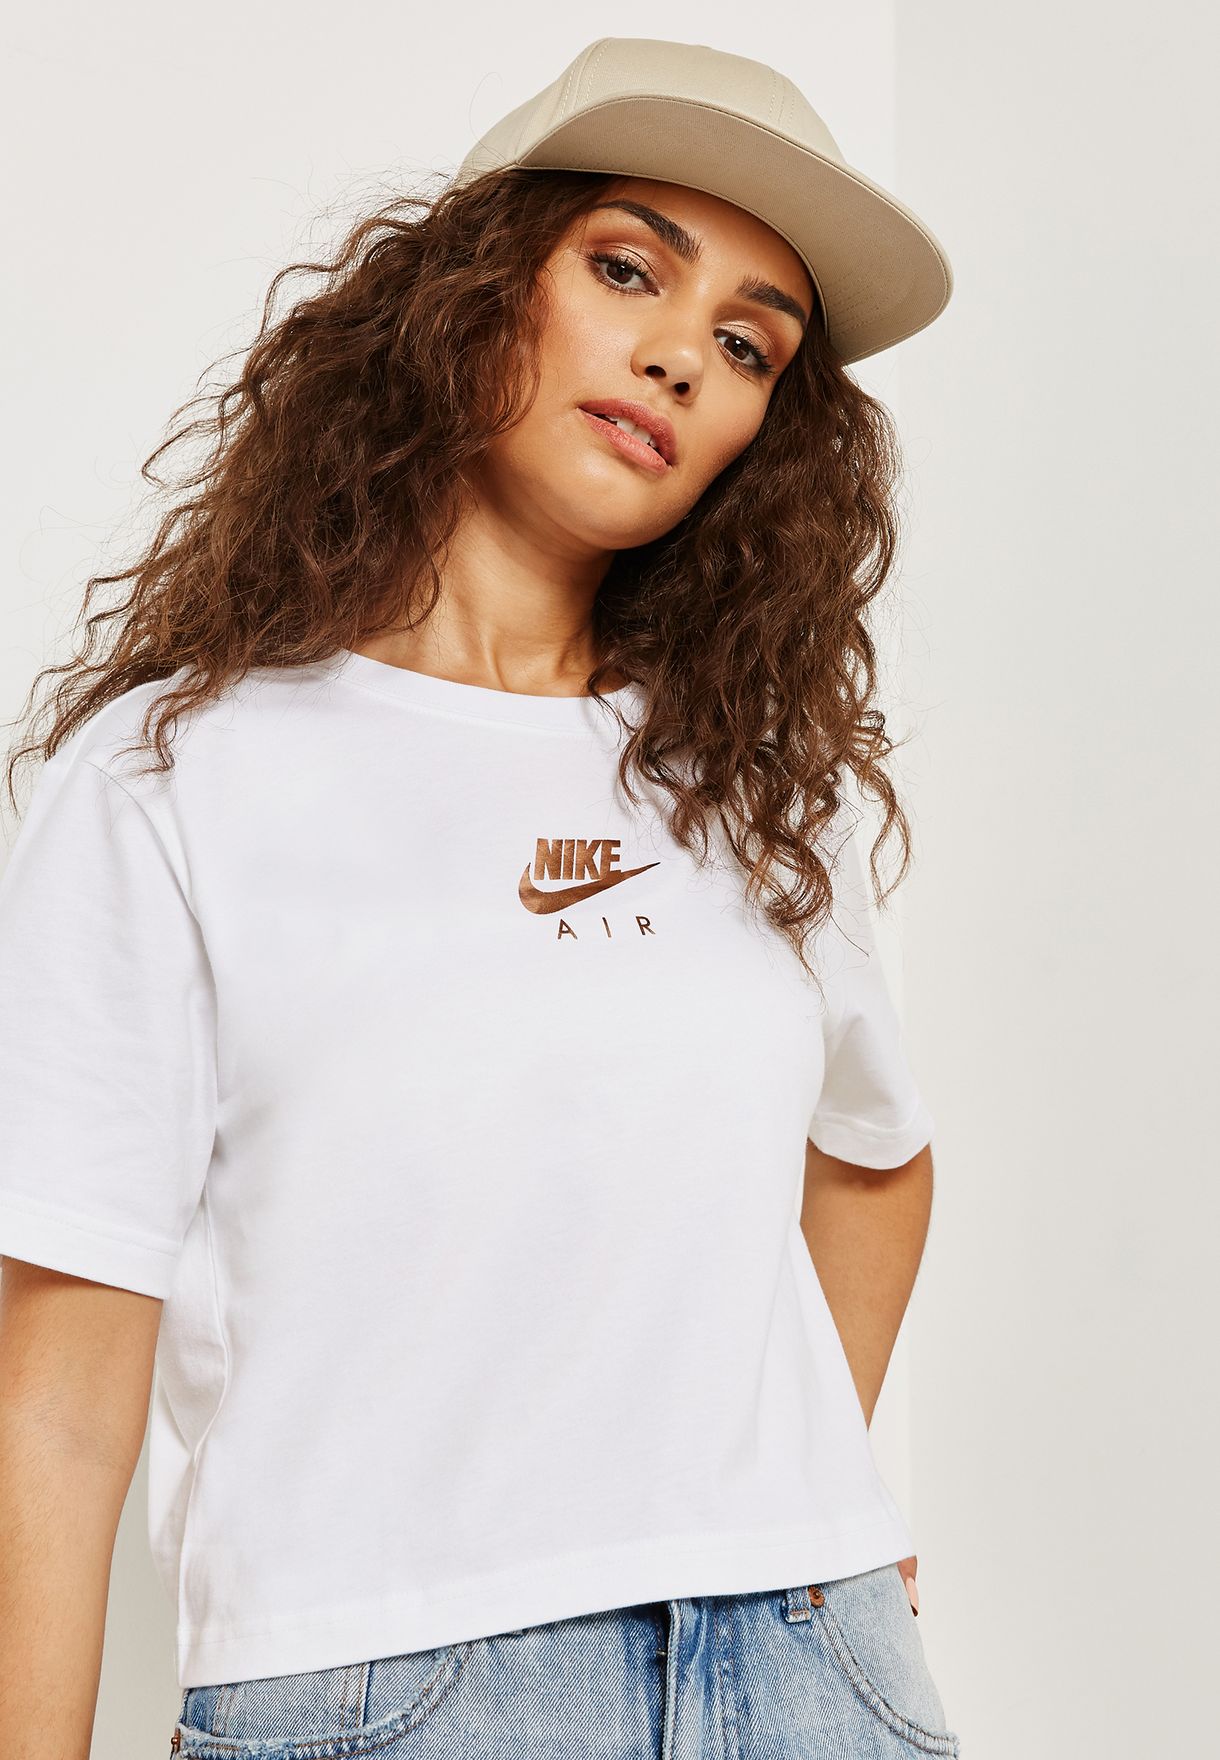 Buy Air Cropped T-Shirt for Women in MENA, Worldwide